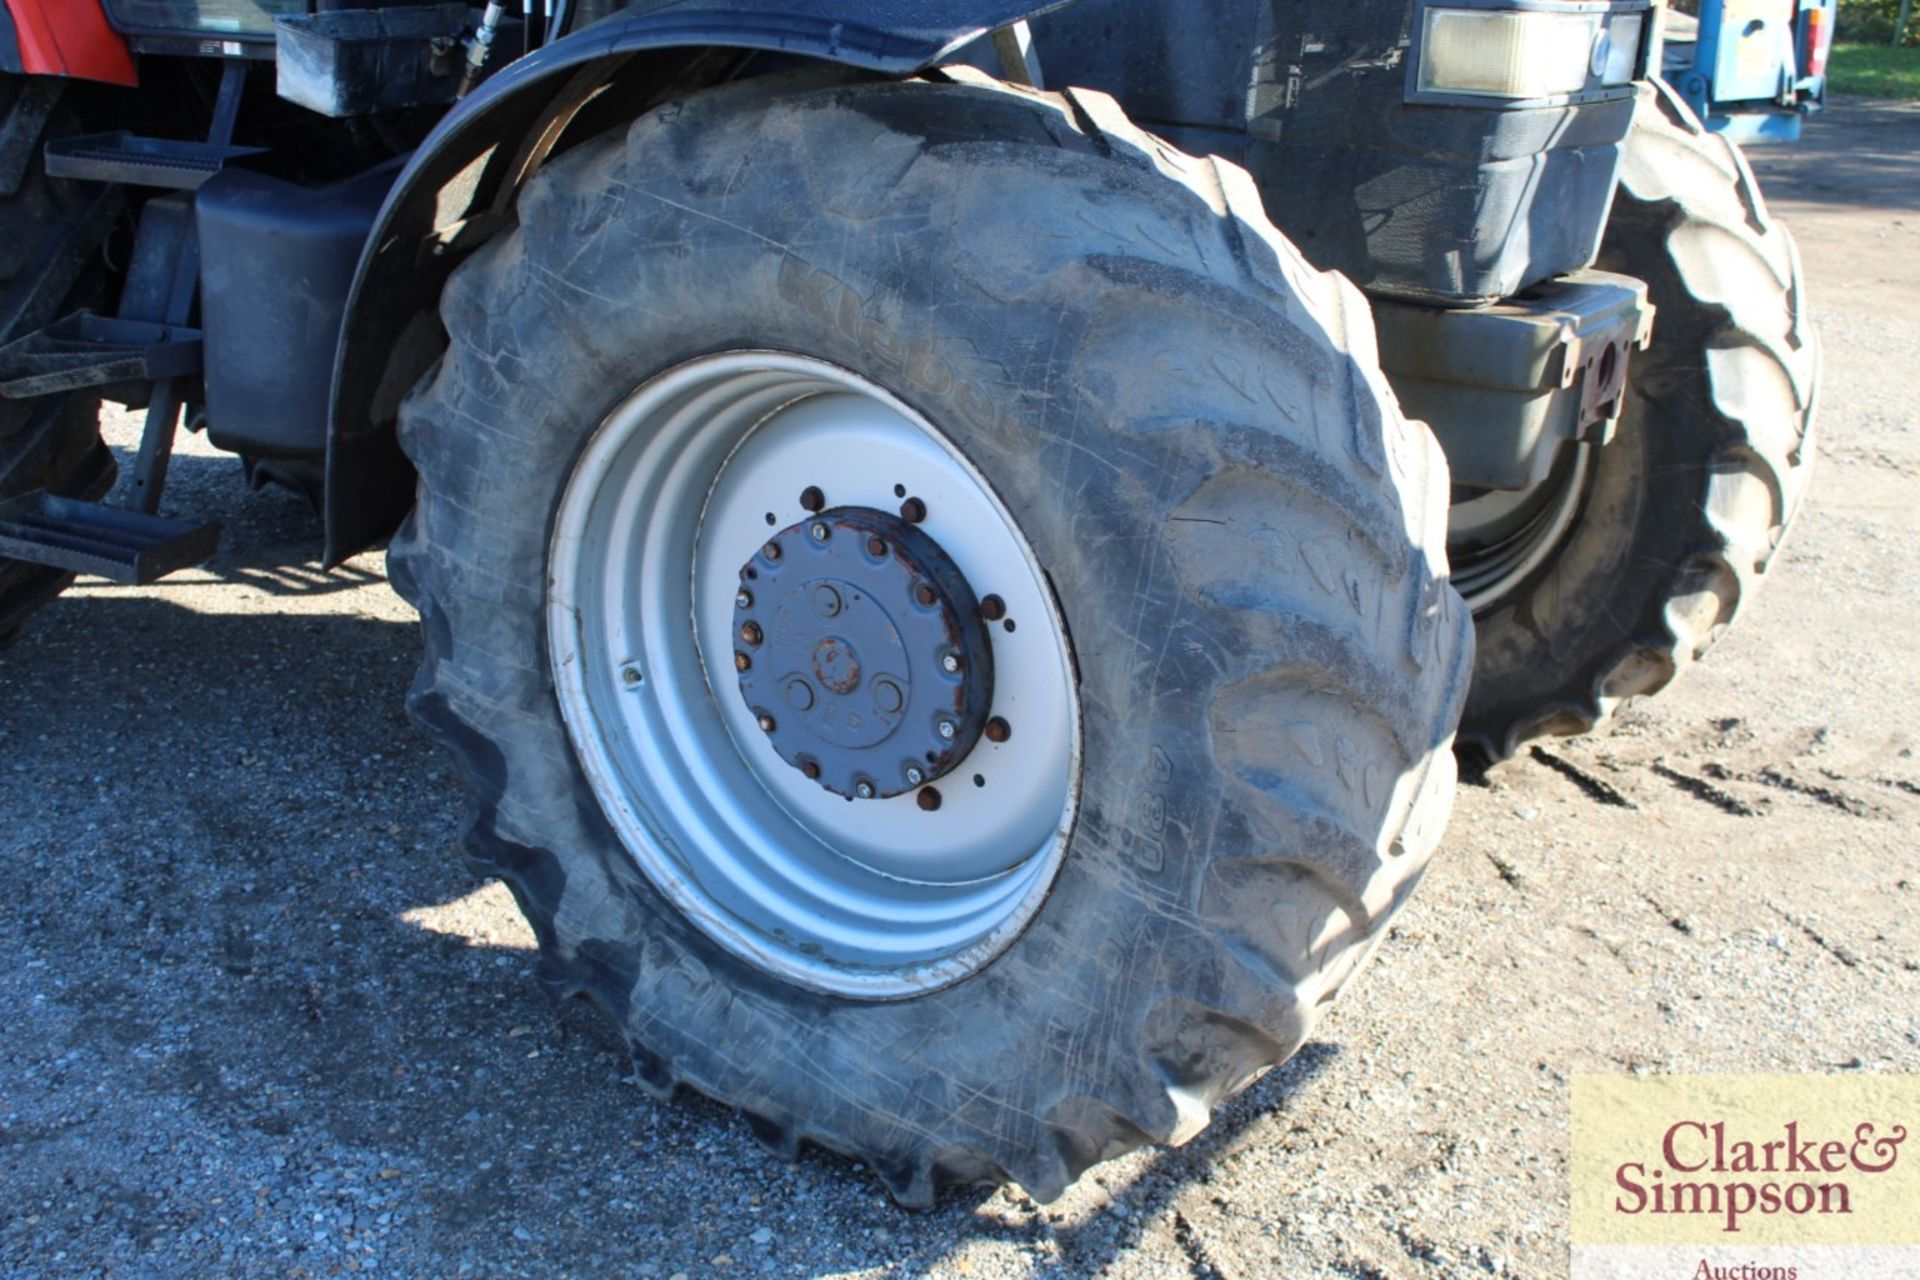 New Holland TM150 4WD tractor. 28/10/2000. 11,839 hours. 520/85R42 rear wheels and tyres @ 60%. - Image 35 of 58